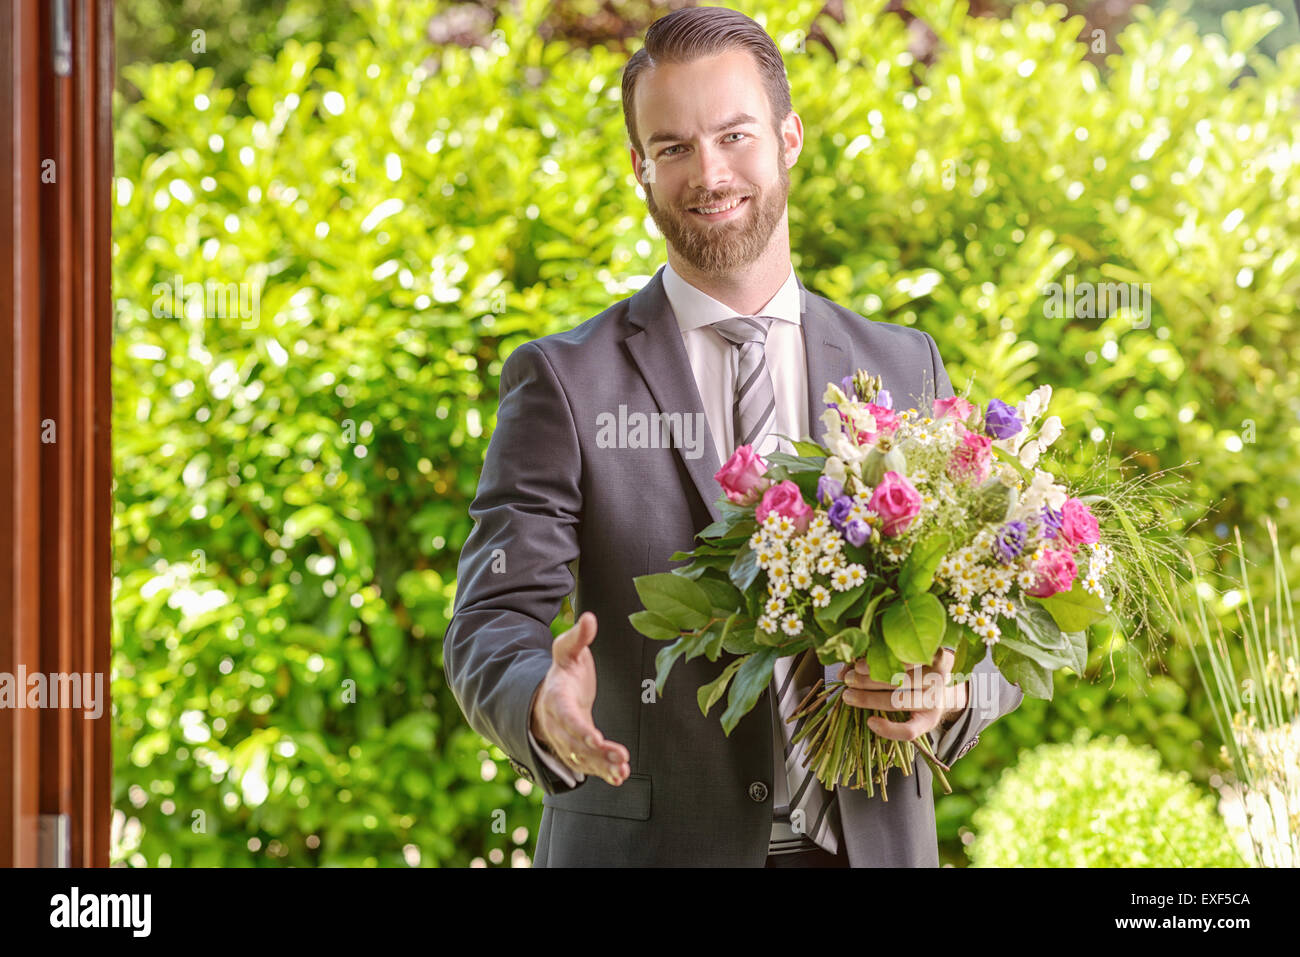 Handsome Young Businessman Holding a Bouquet of Fresh Flowers, Showing Handshake Gesture While Smiling at the Camera. Stock Photo